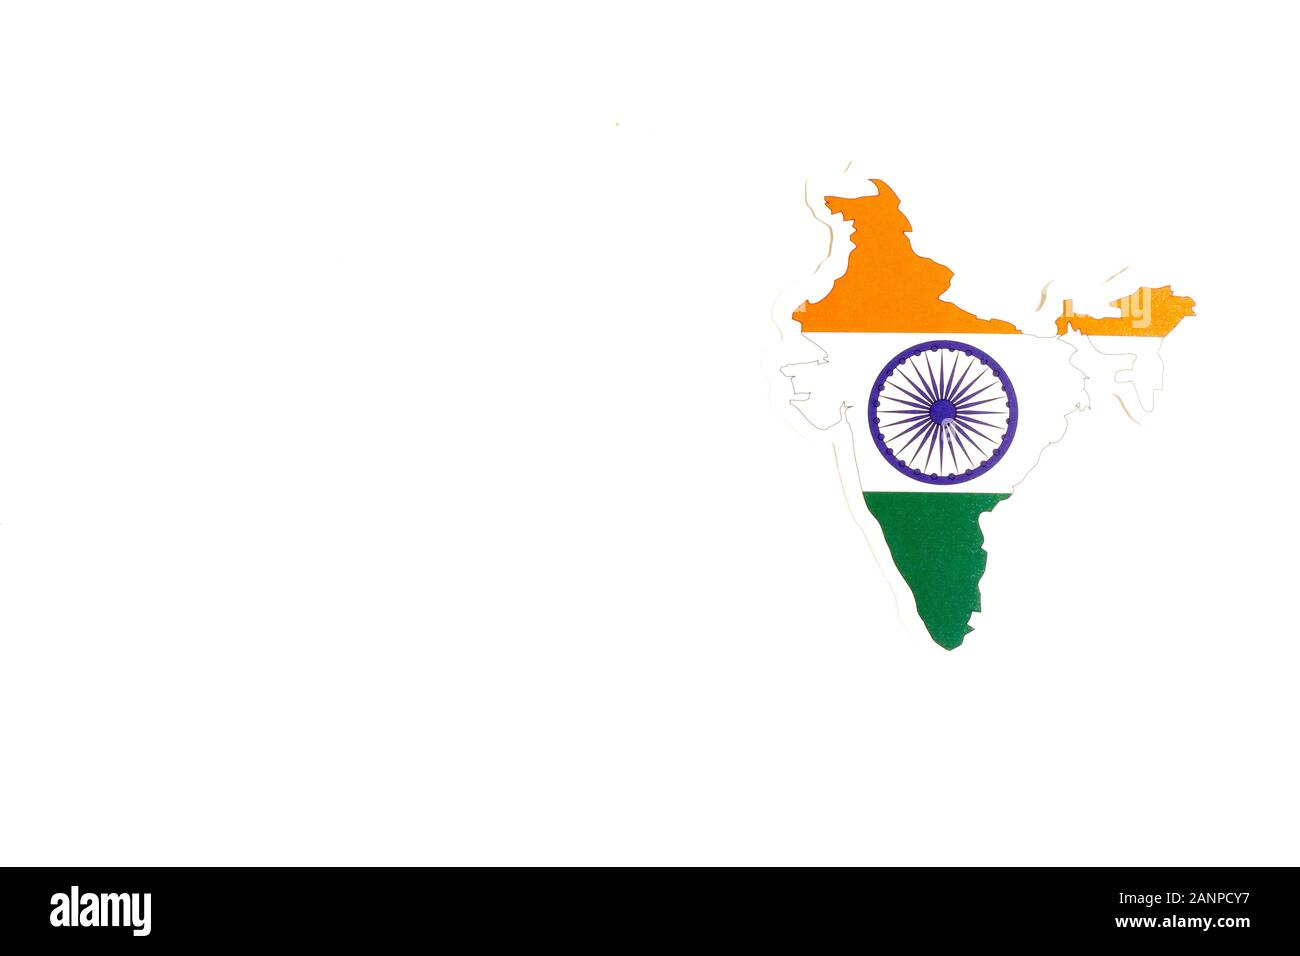 Los Angeles, California, USA - 17 January 2020: National flag of India. Country outline on white background with copy space. Politics illustration Stock Photo